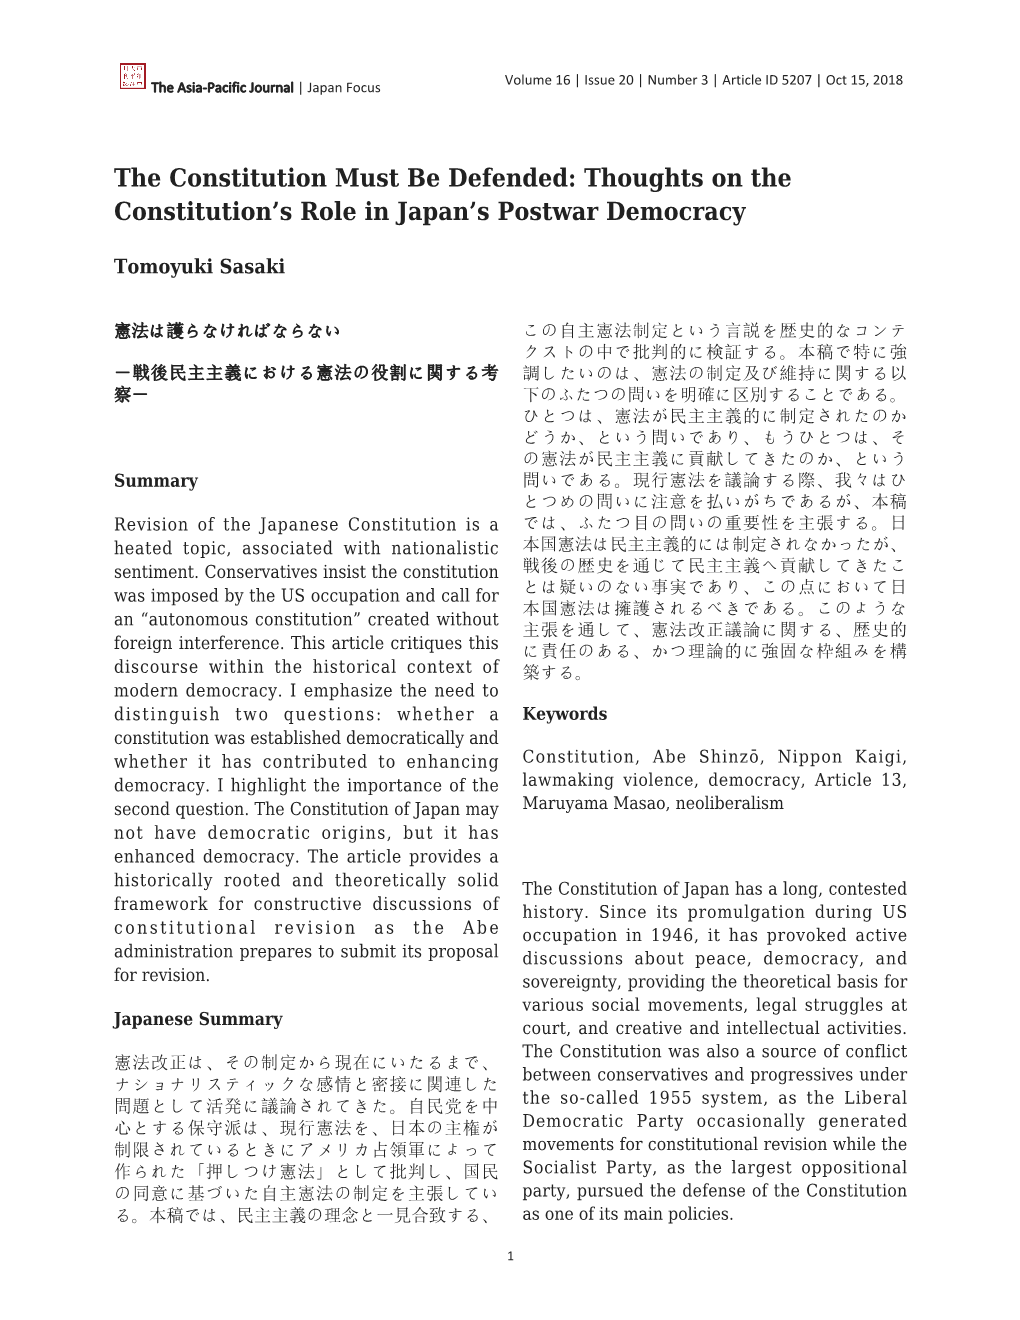 Thoughts on the Constitution's Role in Japan's